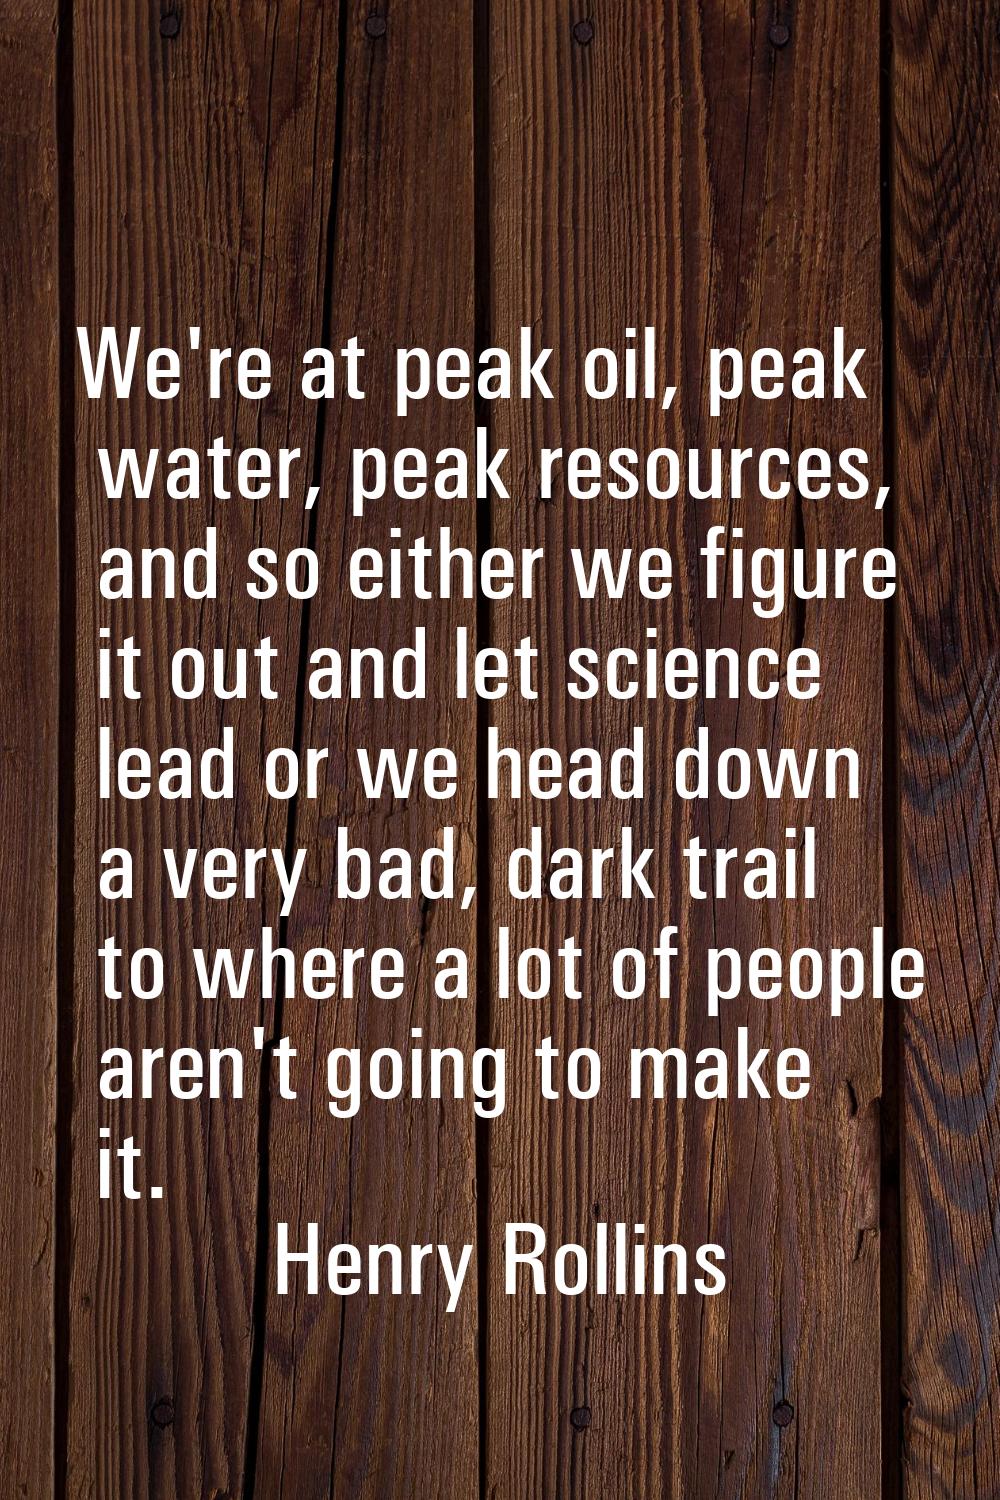 We're at peak oil, peak water, peak resources, and so either we figure it out and let science lead 